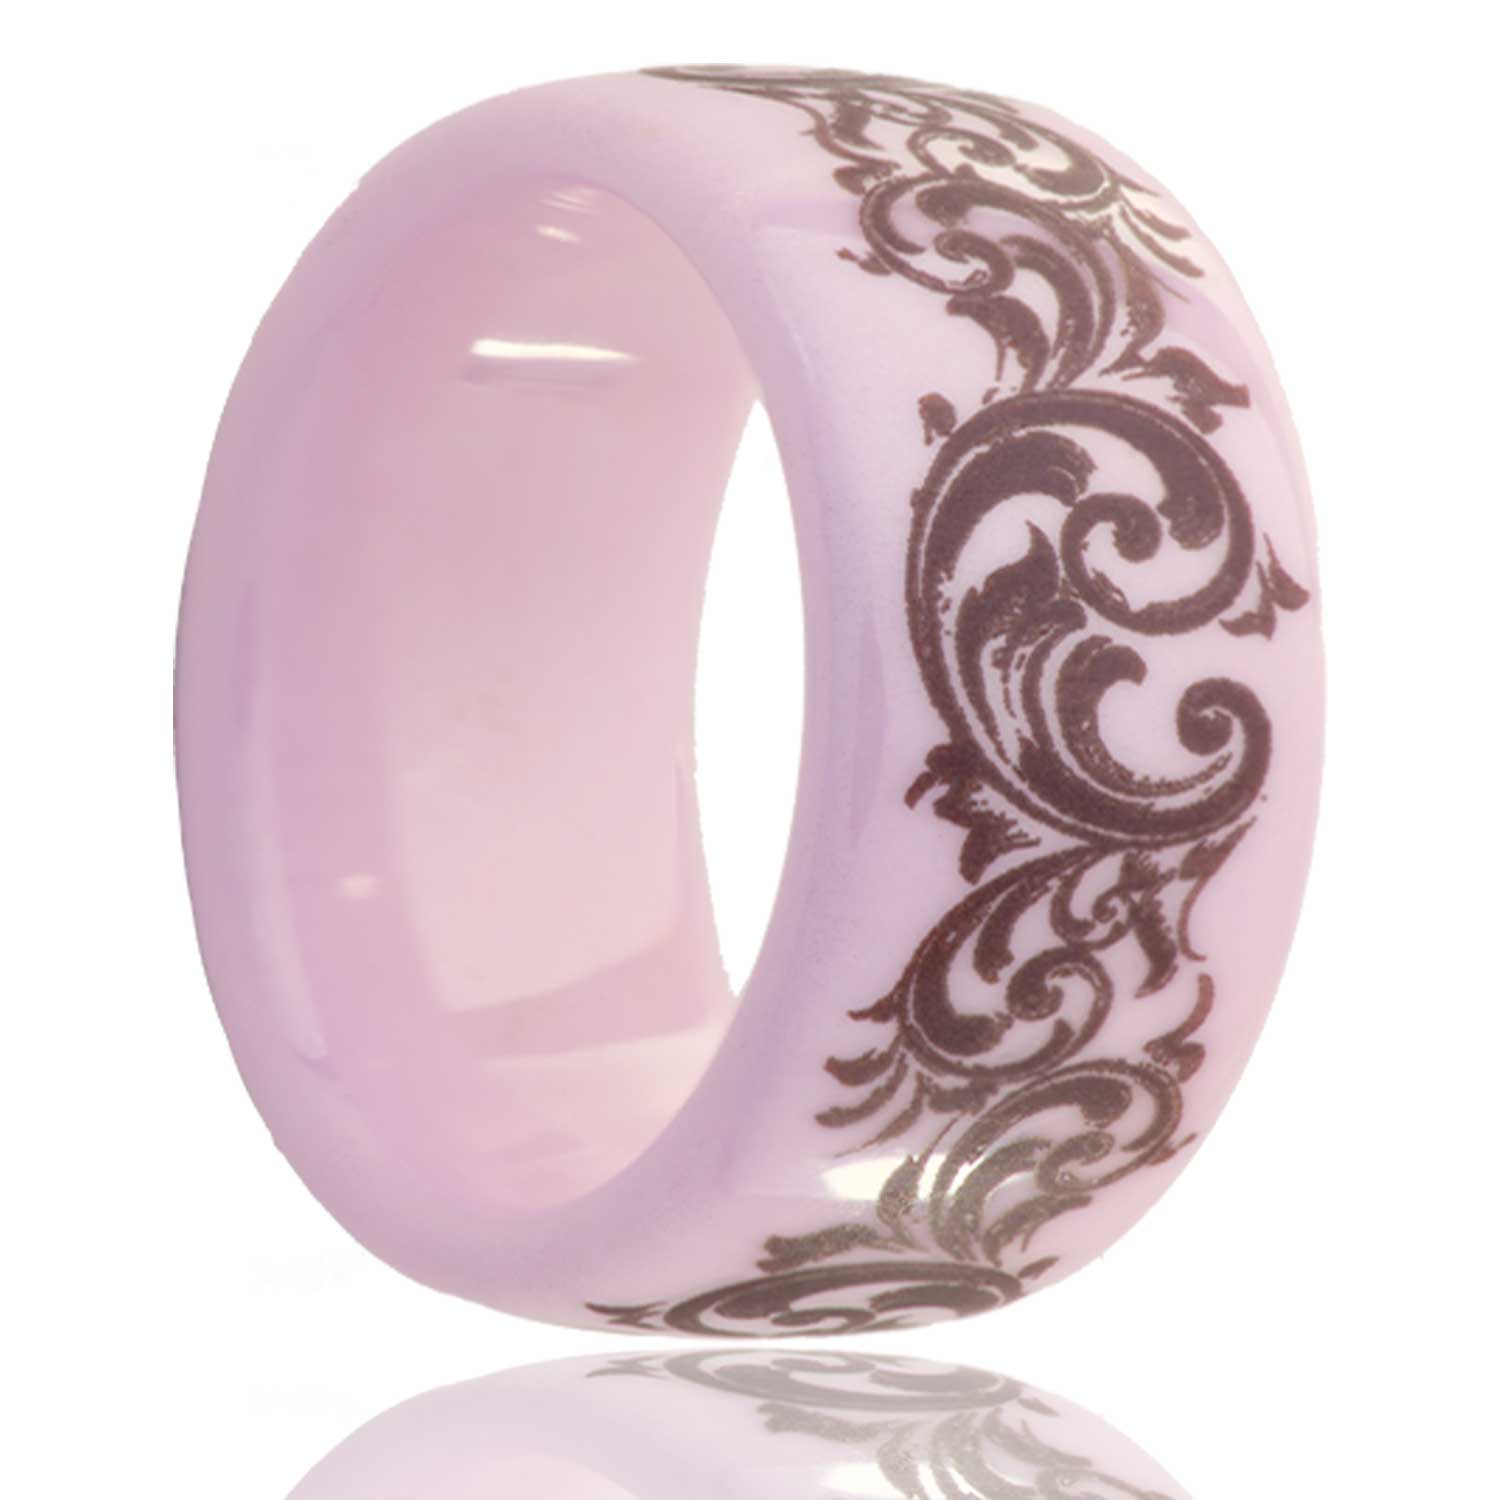 A swirl pattern domed pink ceramic men's wedding band displayed on a neutral white background.